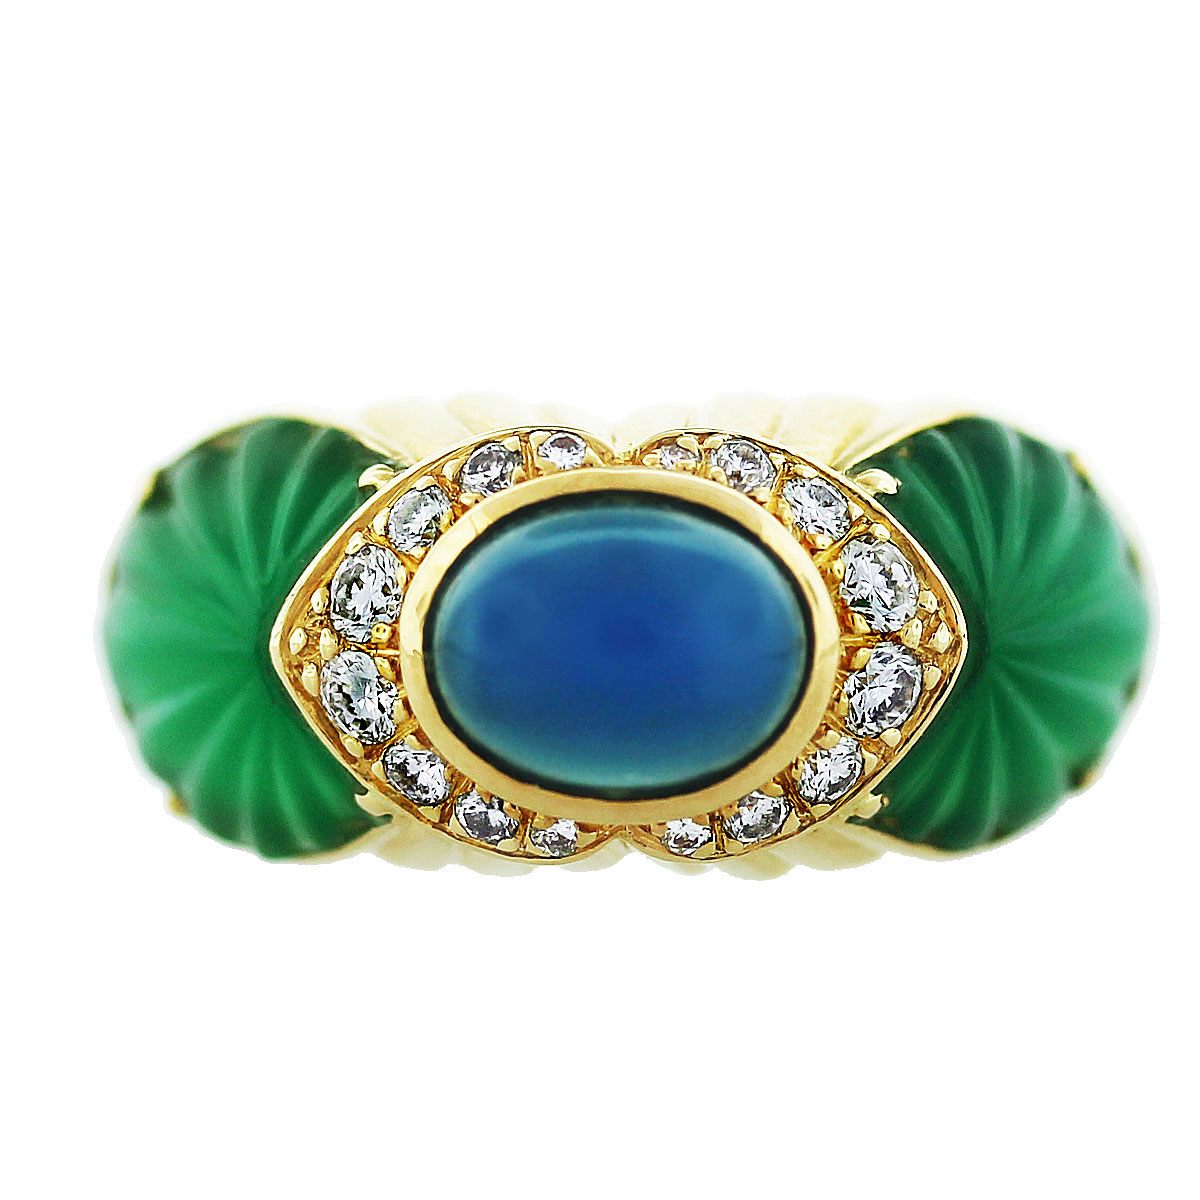 Must-Have Items From Cartier If You Love Gemstones